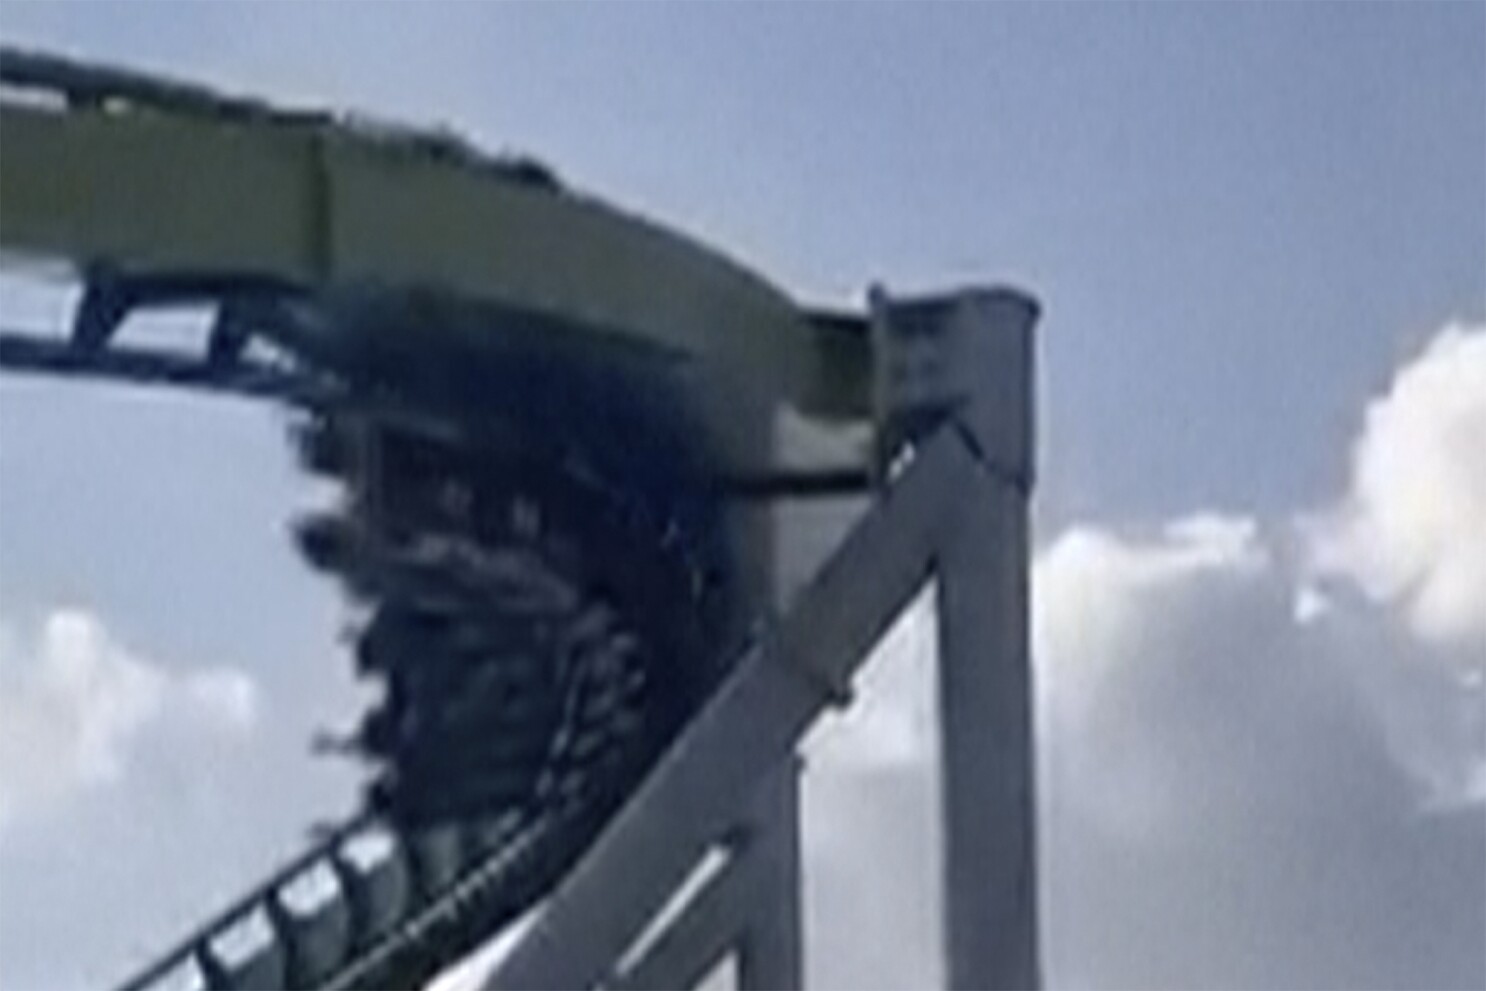 North carolina amusement park closes ride after discovering crack in support  beam | ap news